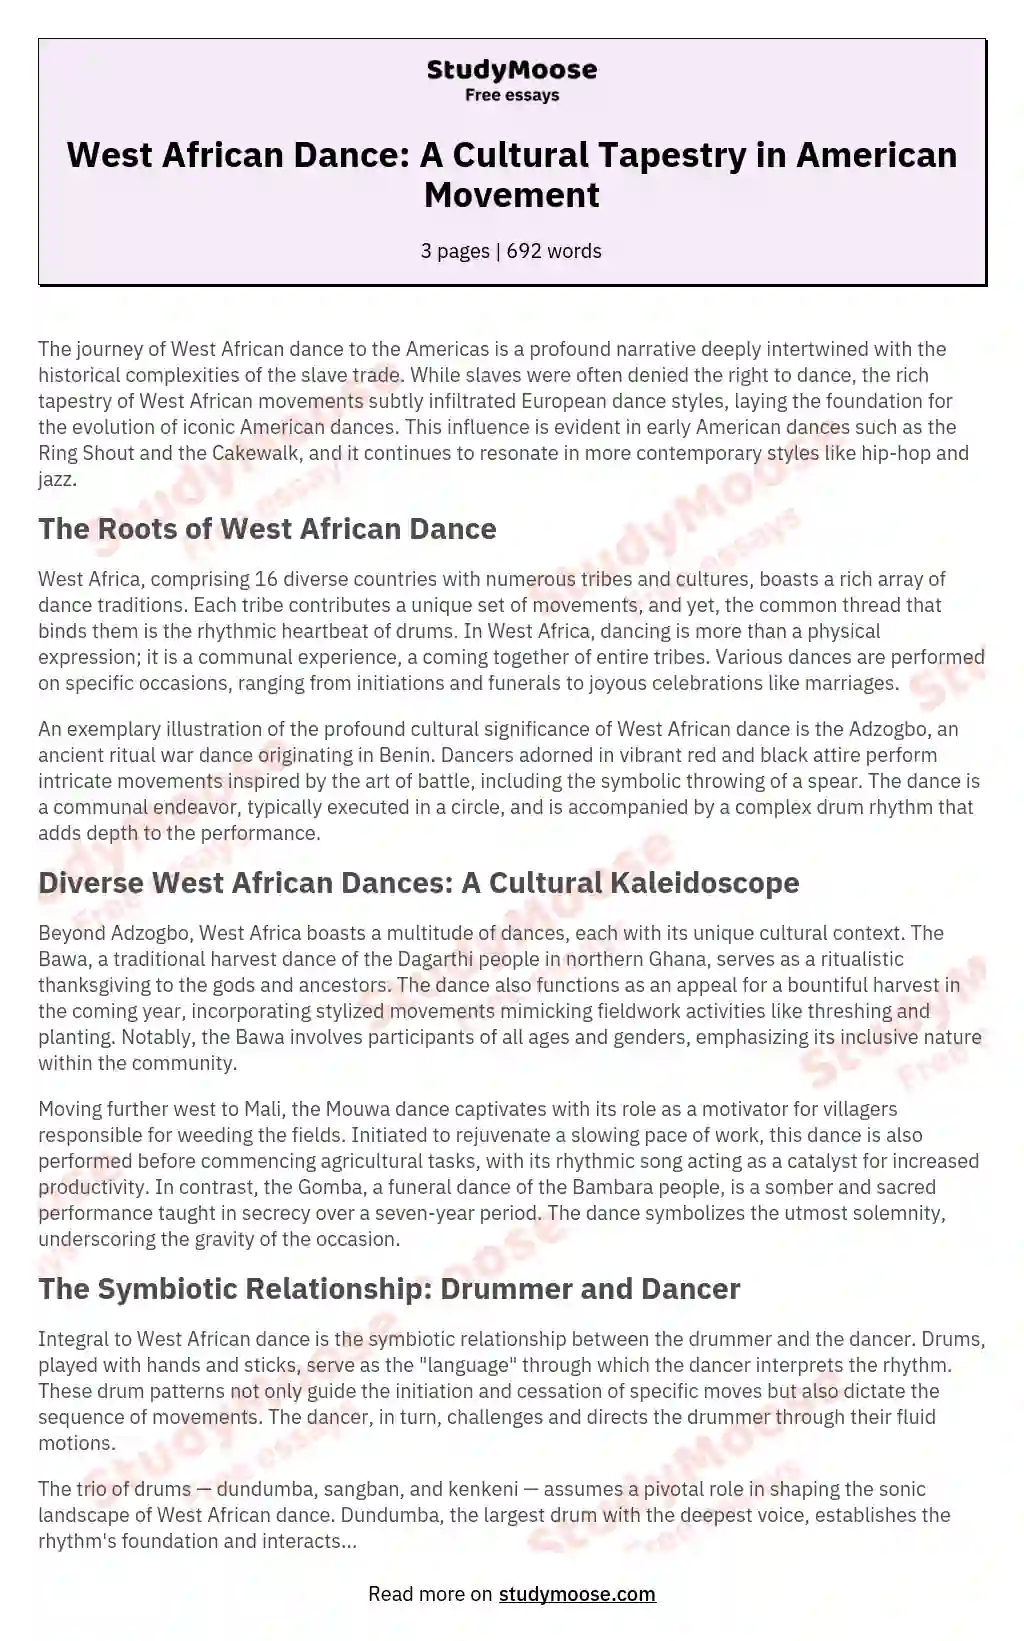 West African Dance: A Cultural Tapestry in American Movement essay